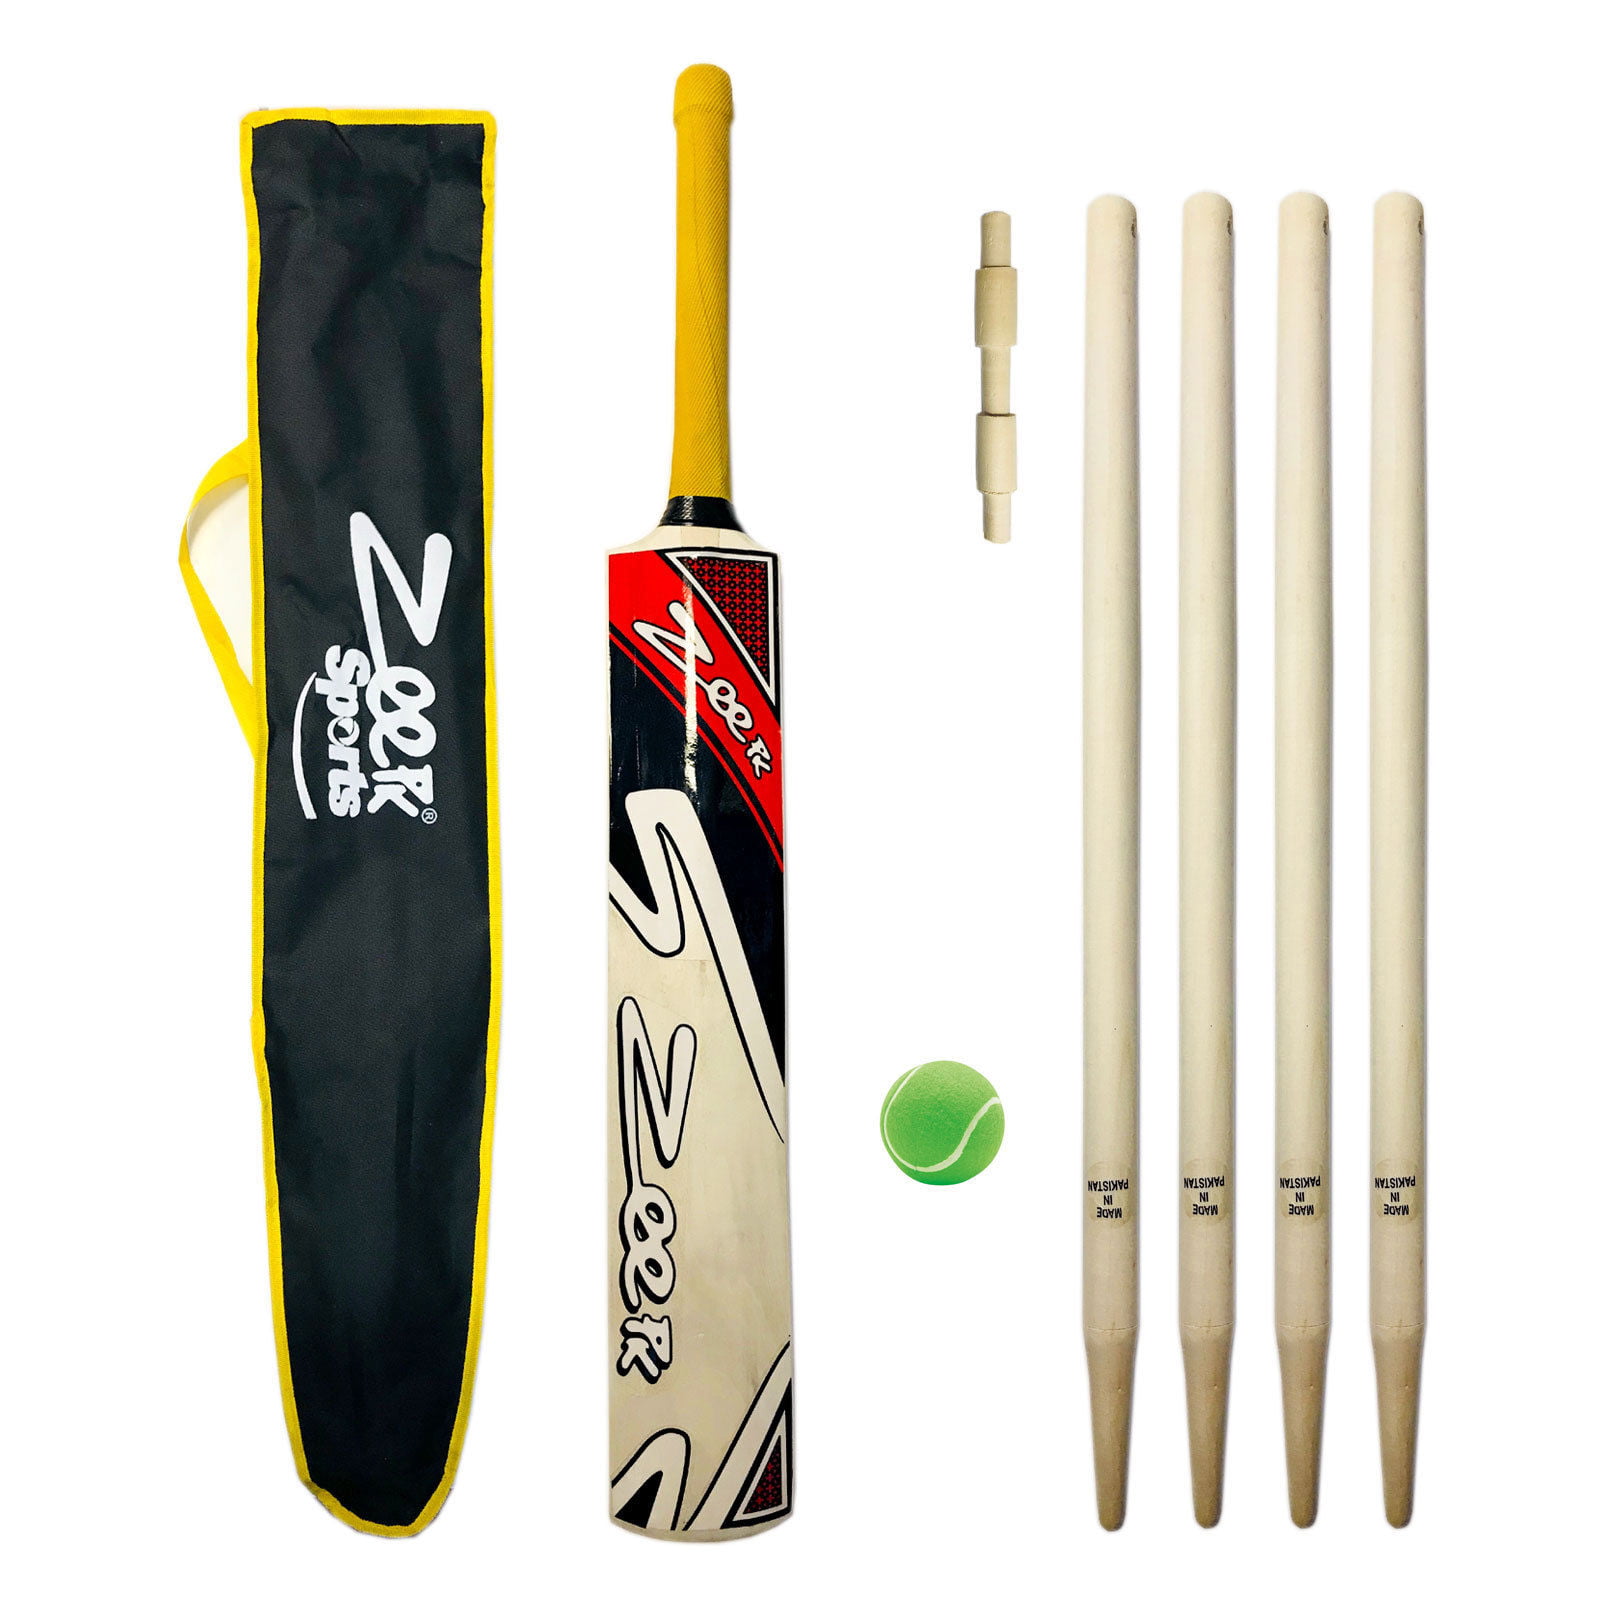 CW STORM Cricket Set Red With Kashmir Willow Bat Accessories Kit 9Pcs All Size 